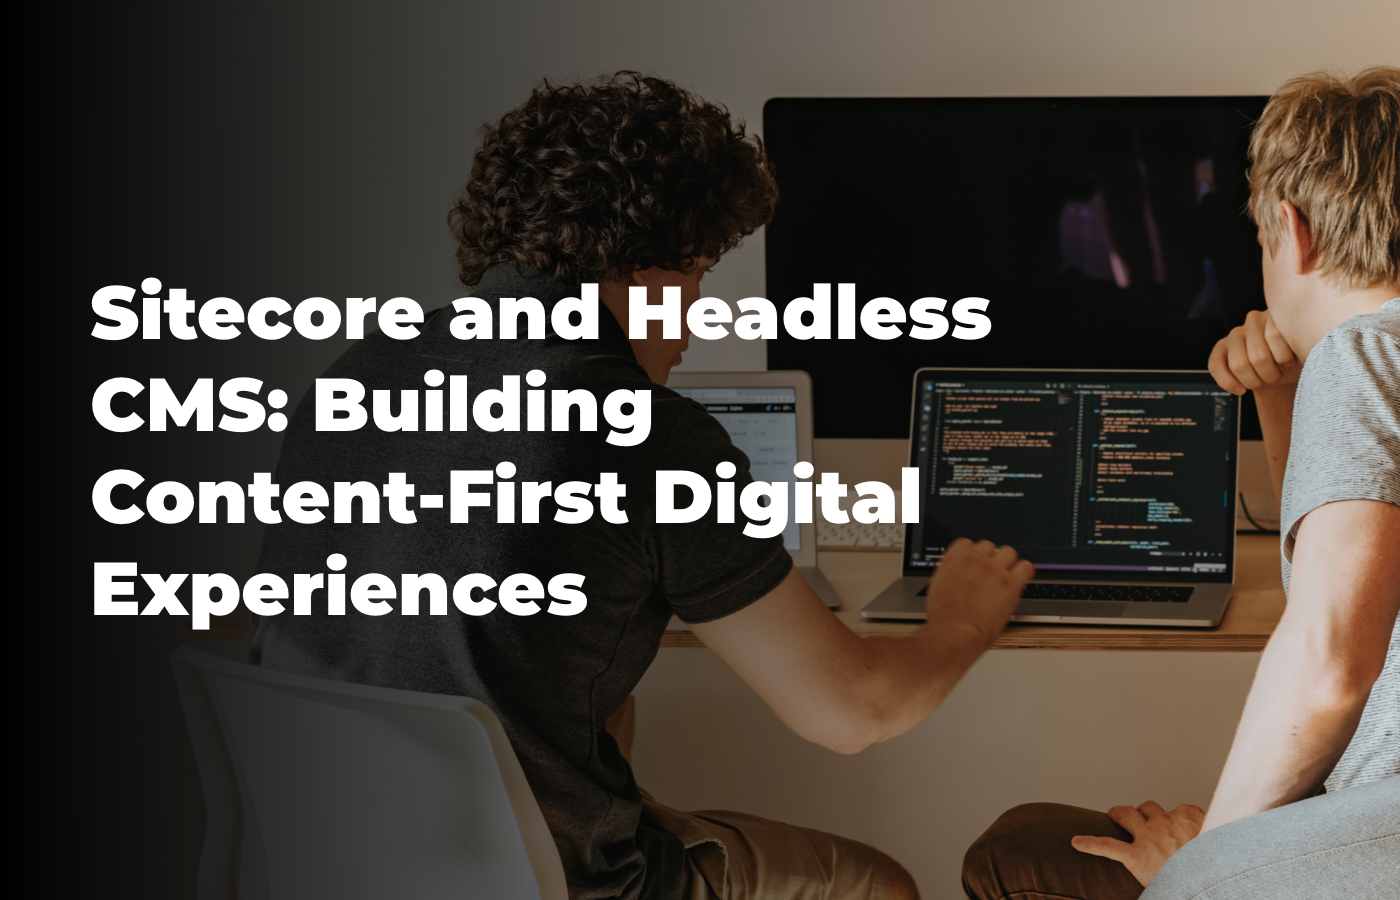 Sitecore and Headless CMS: Building Content-First Digital Experiences